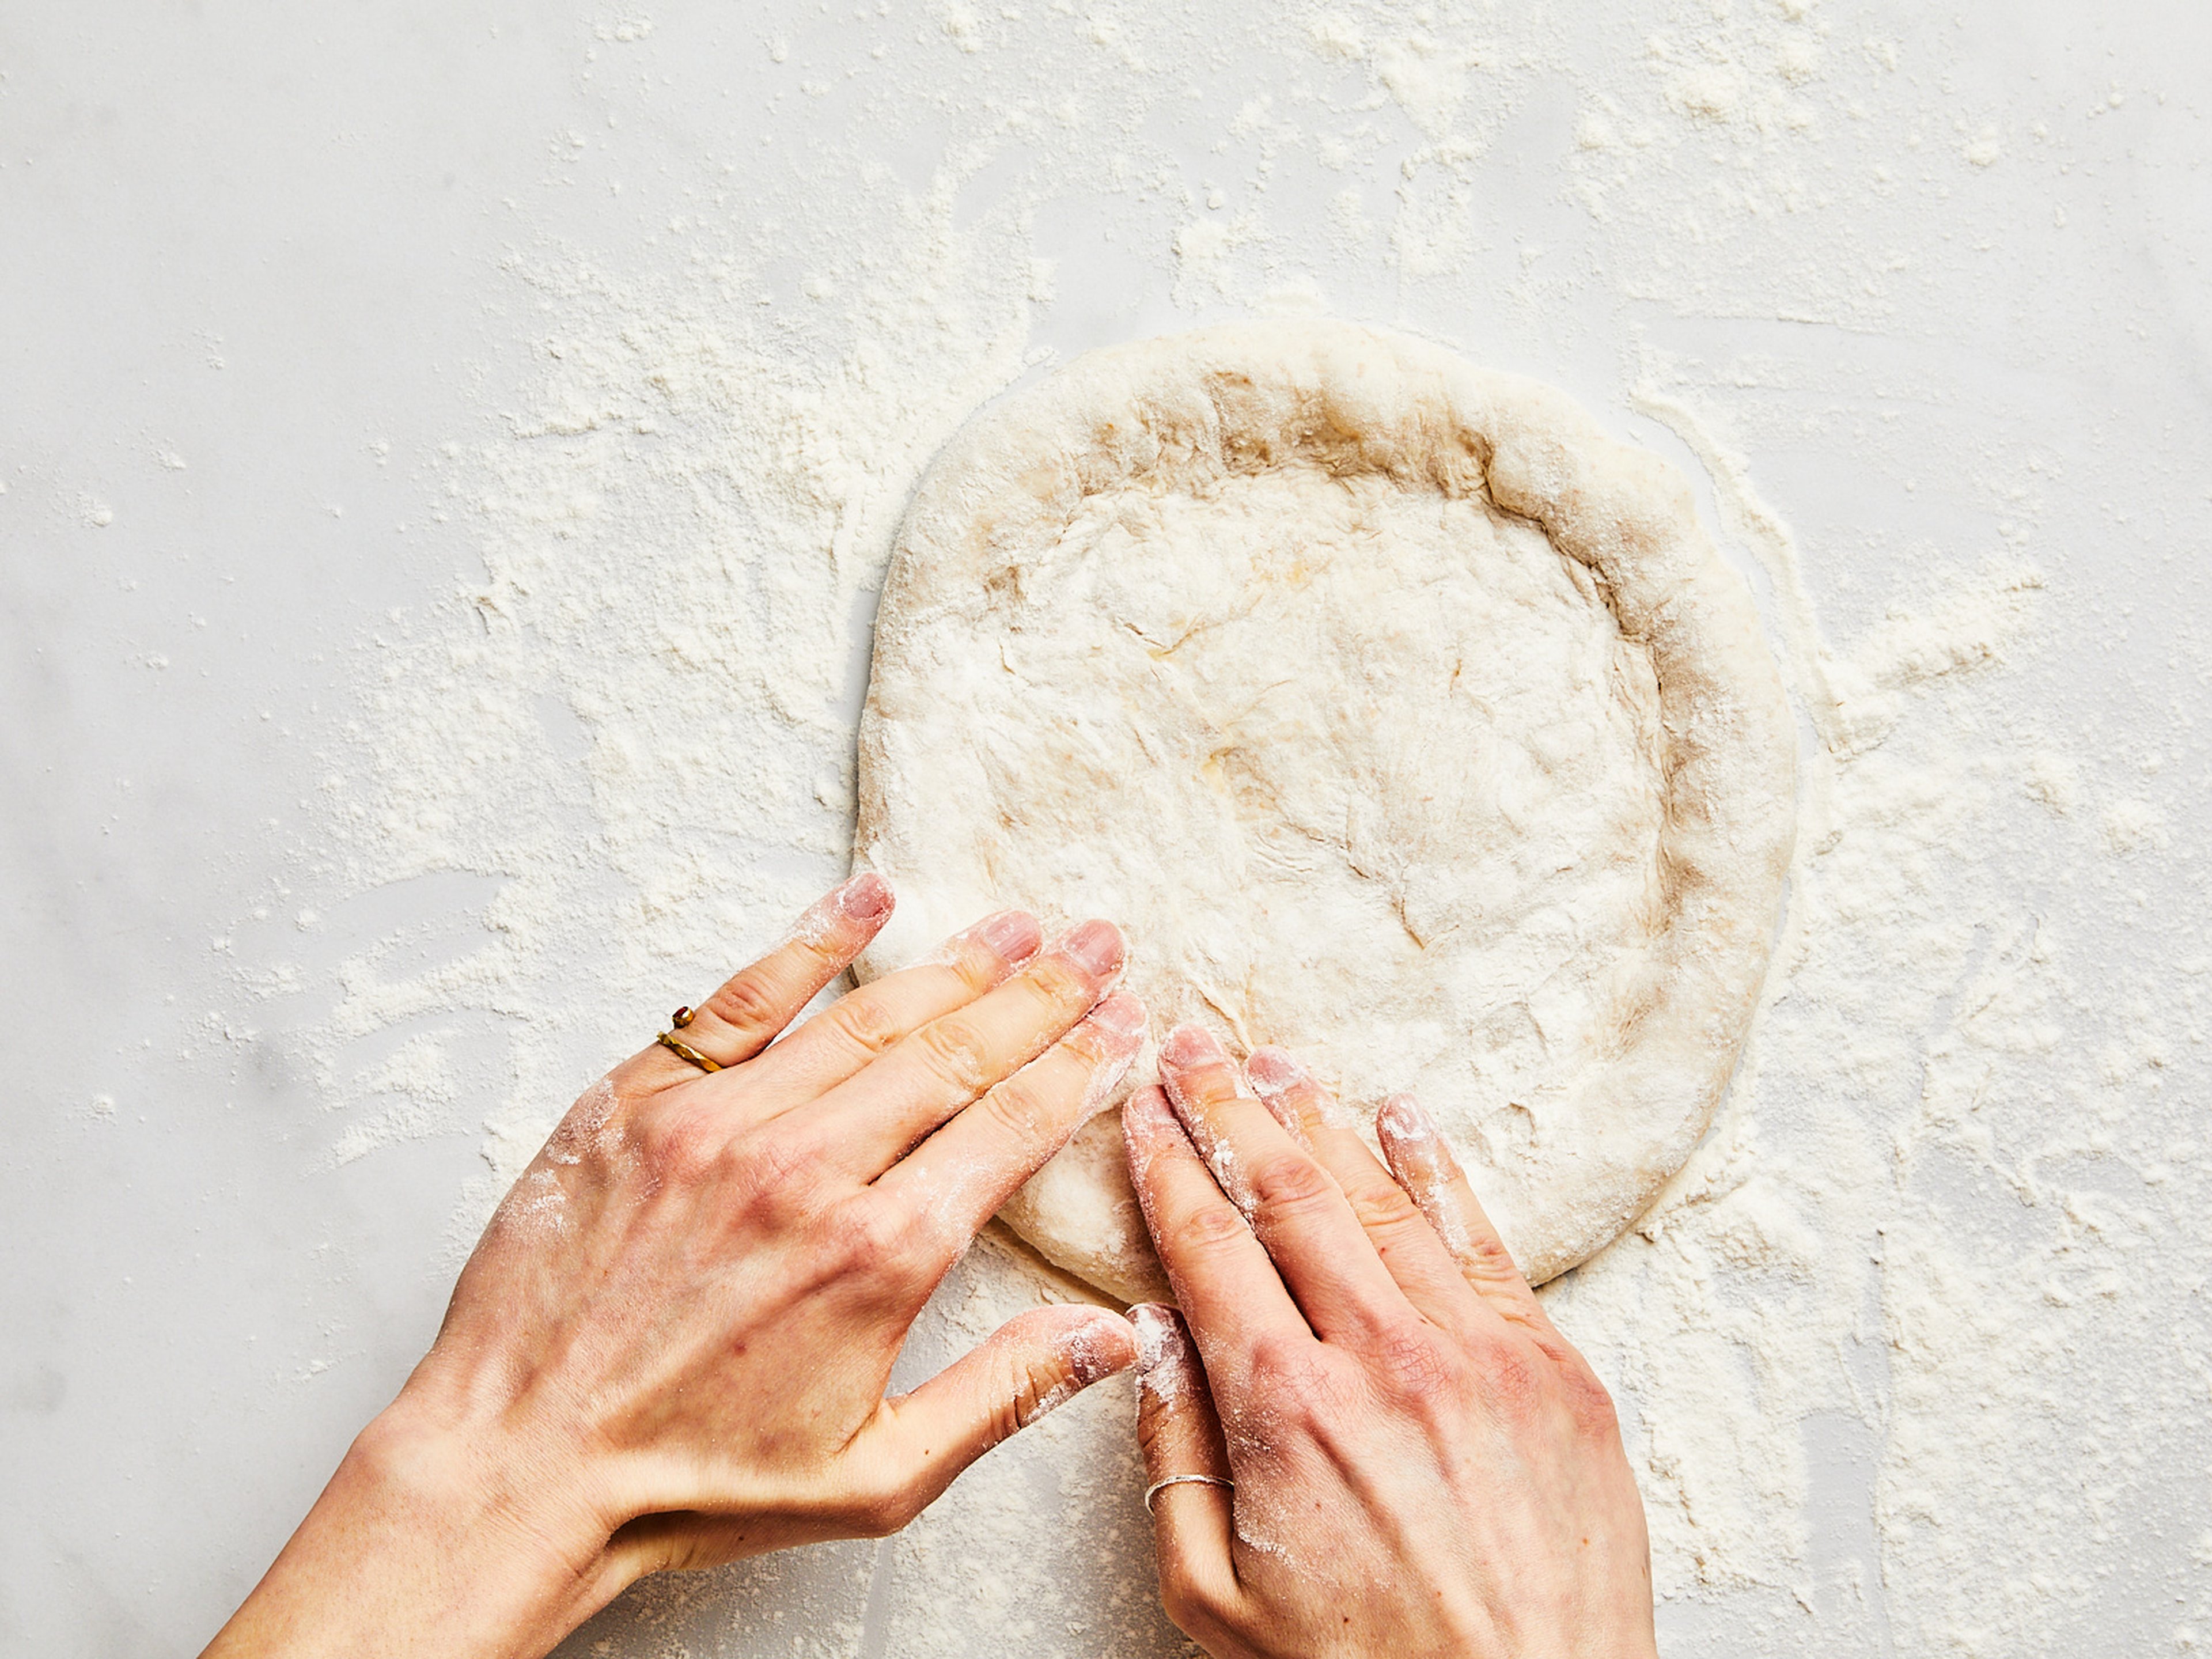 How to Make Better Pizza Dough At Home